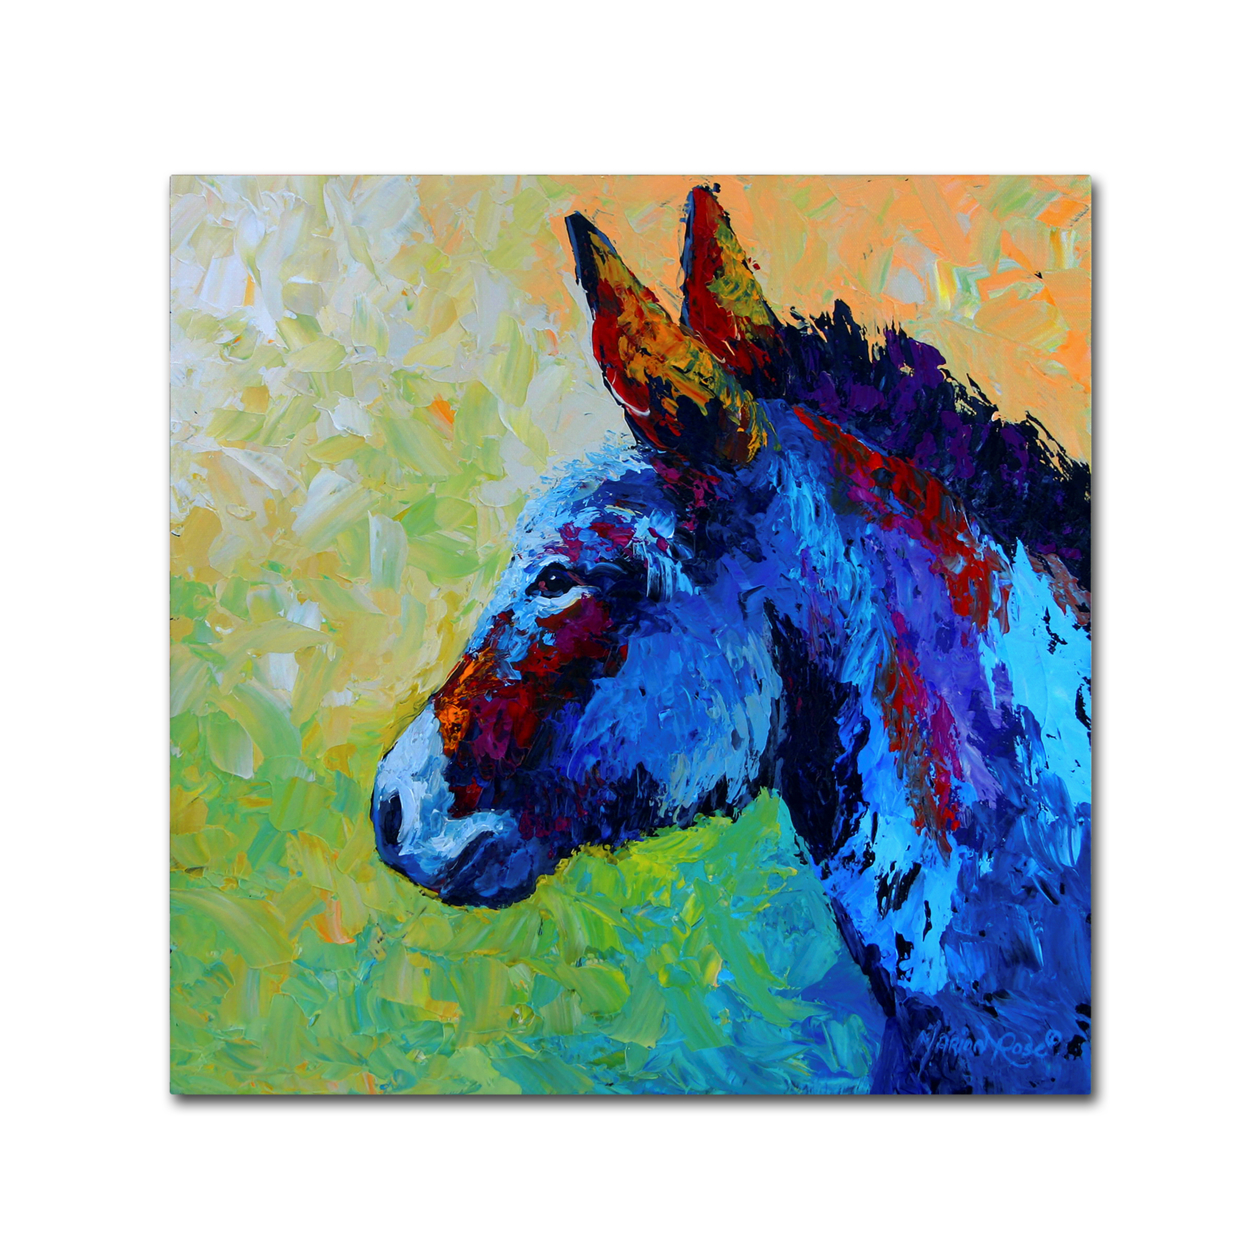 Marion Rose 'Burro' Ready To Hang Canvas Art 18 X 18 Inches Made In USA